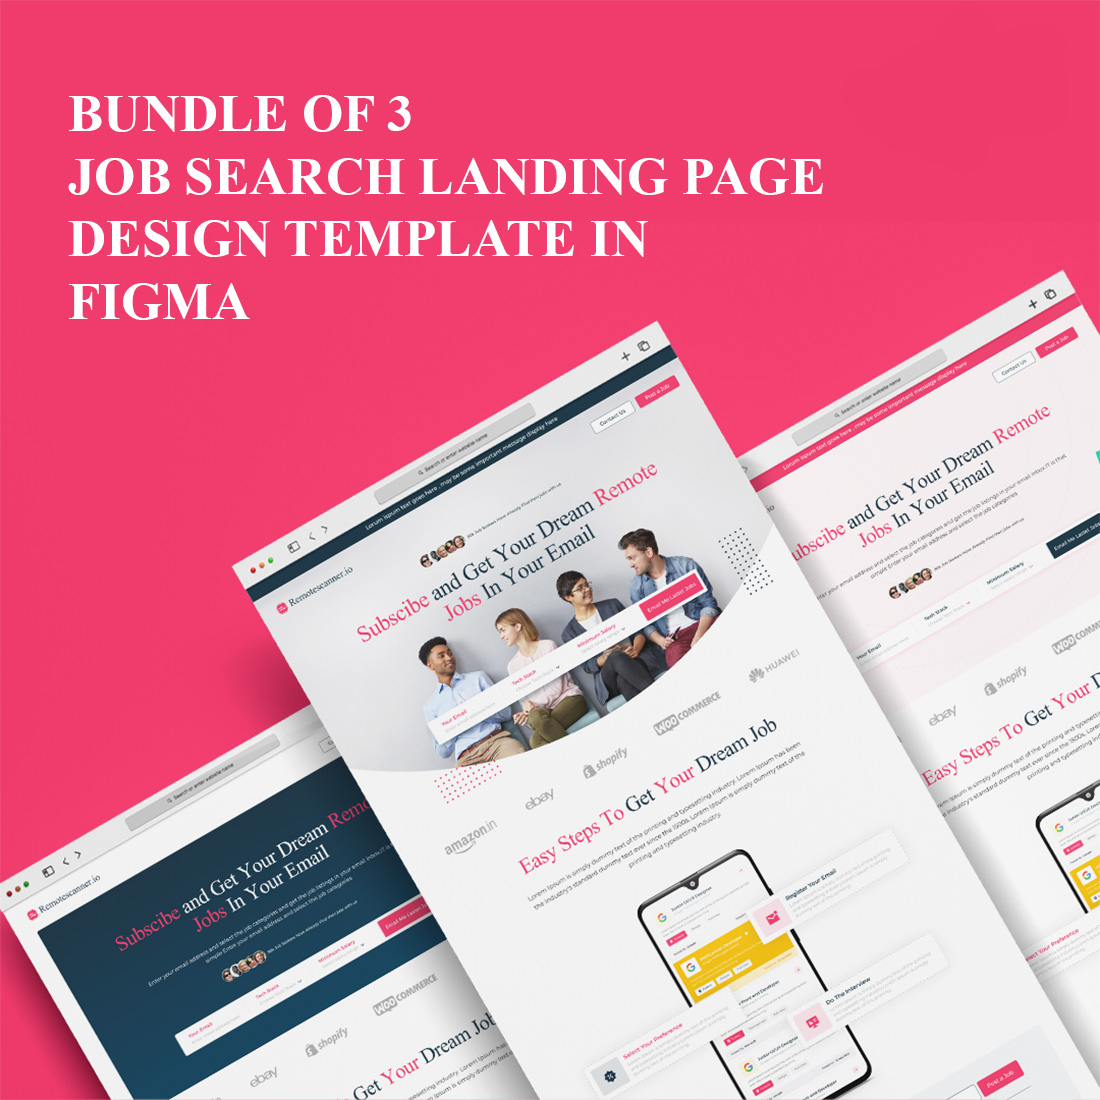 Bundle of 3 Job Search Landing Page Design Template in Figma in Just $8 cover image.